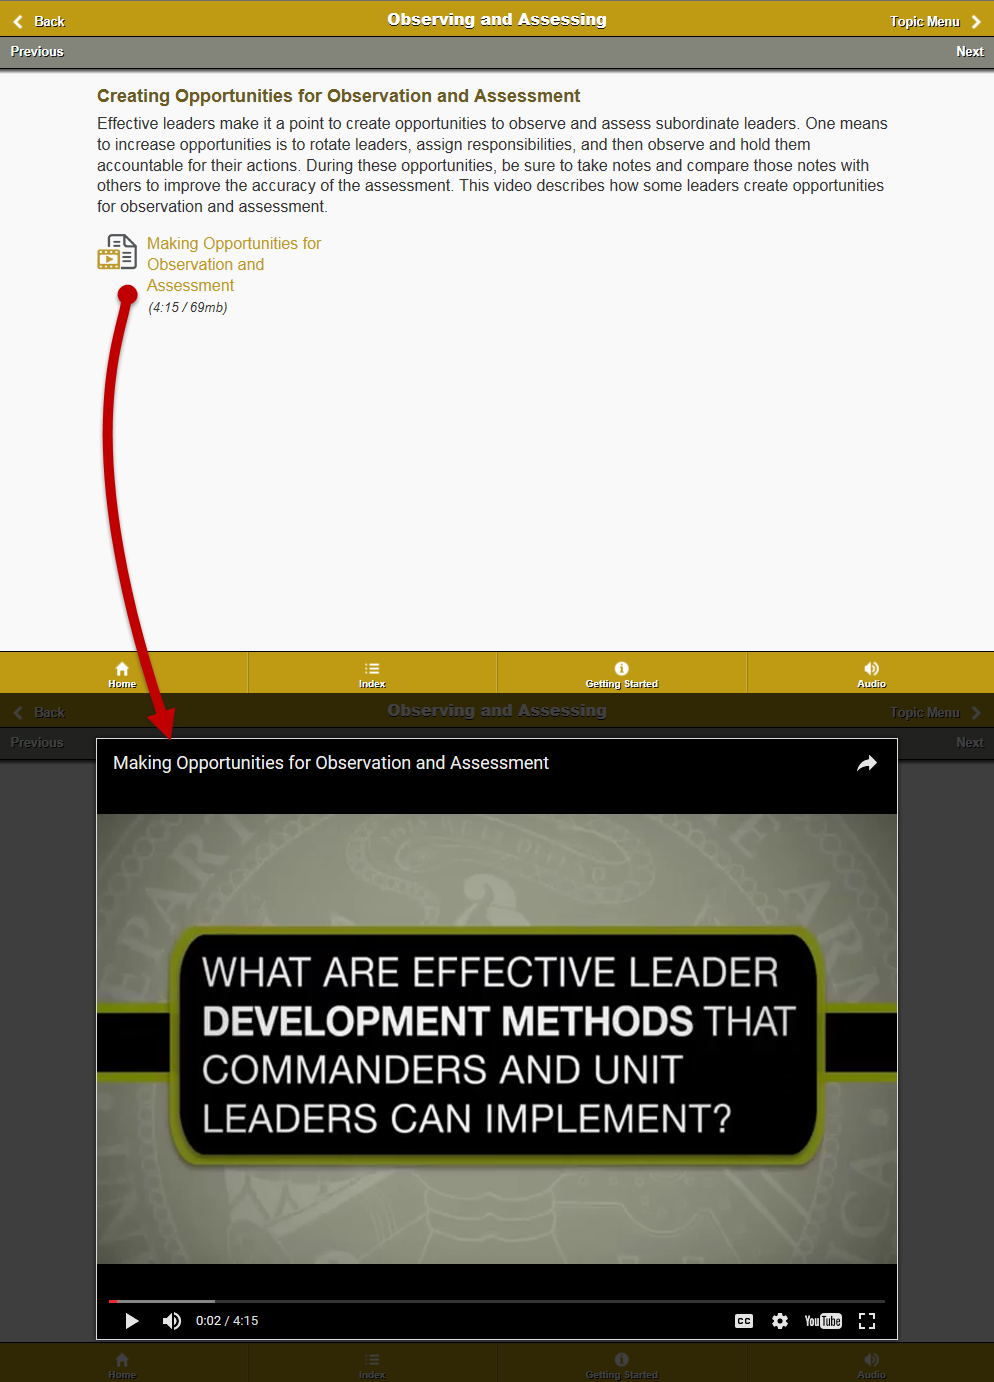 LeaderMap content pages, with the first page displaying a video title and the second page displaying the video player